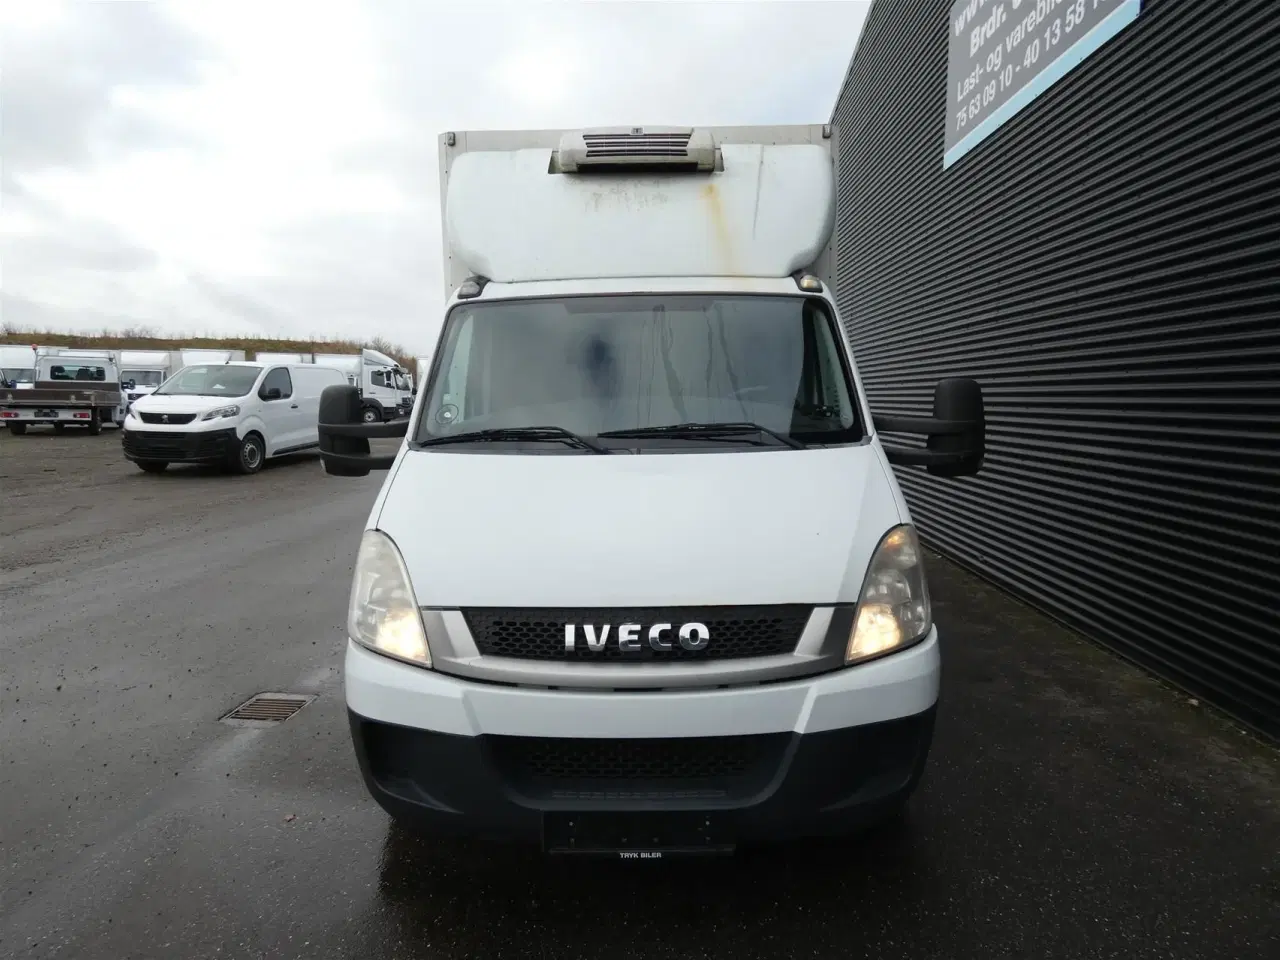 Billede 2 - Iveco Daily 35S14 3450mm 2,3 D 136HK Ladv./Chas.